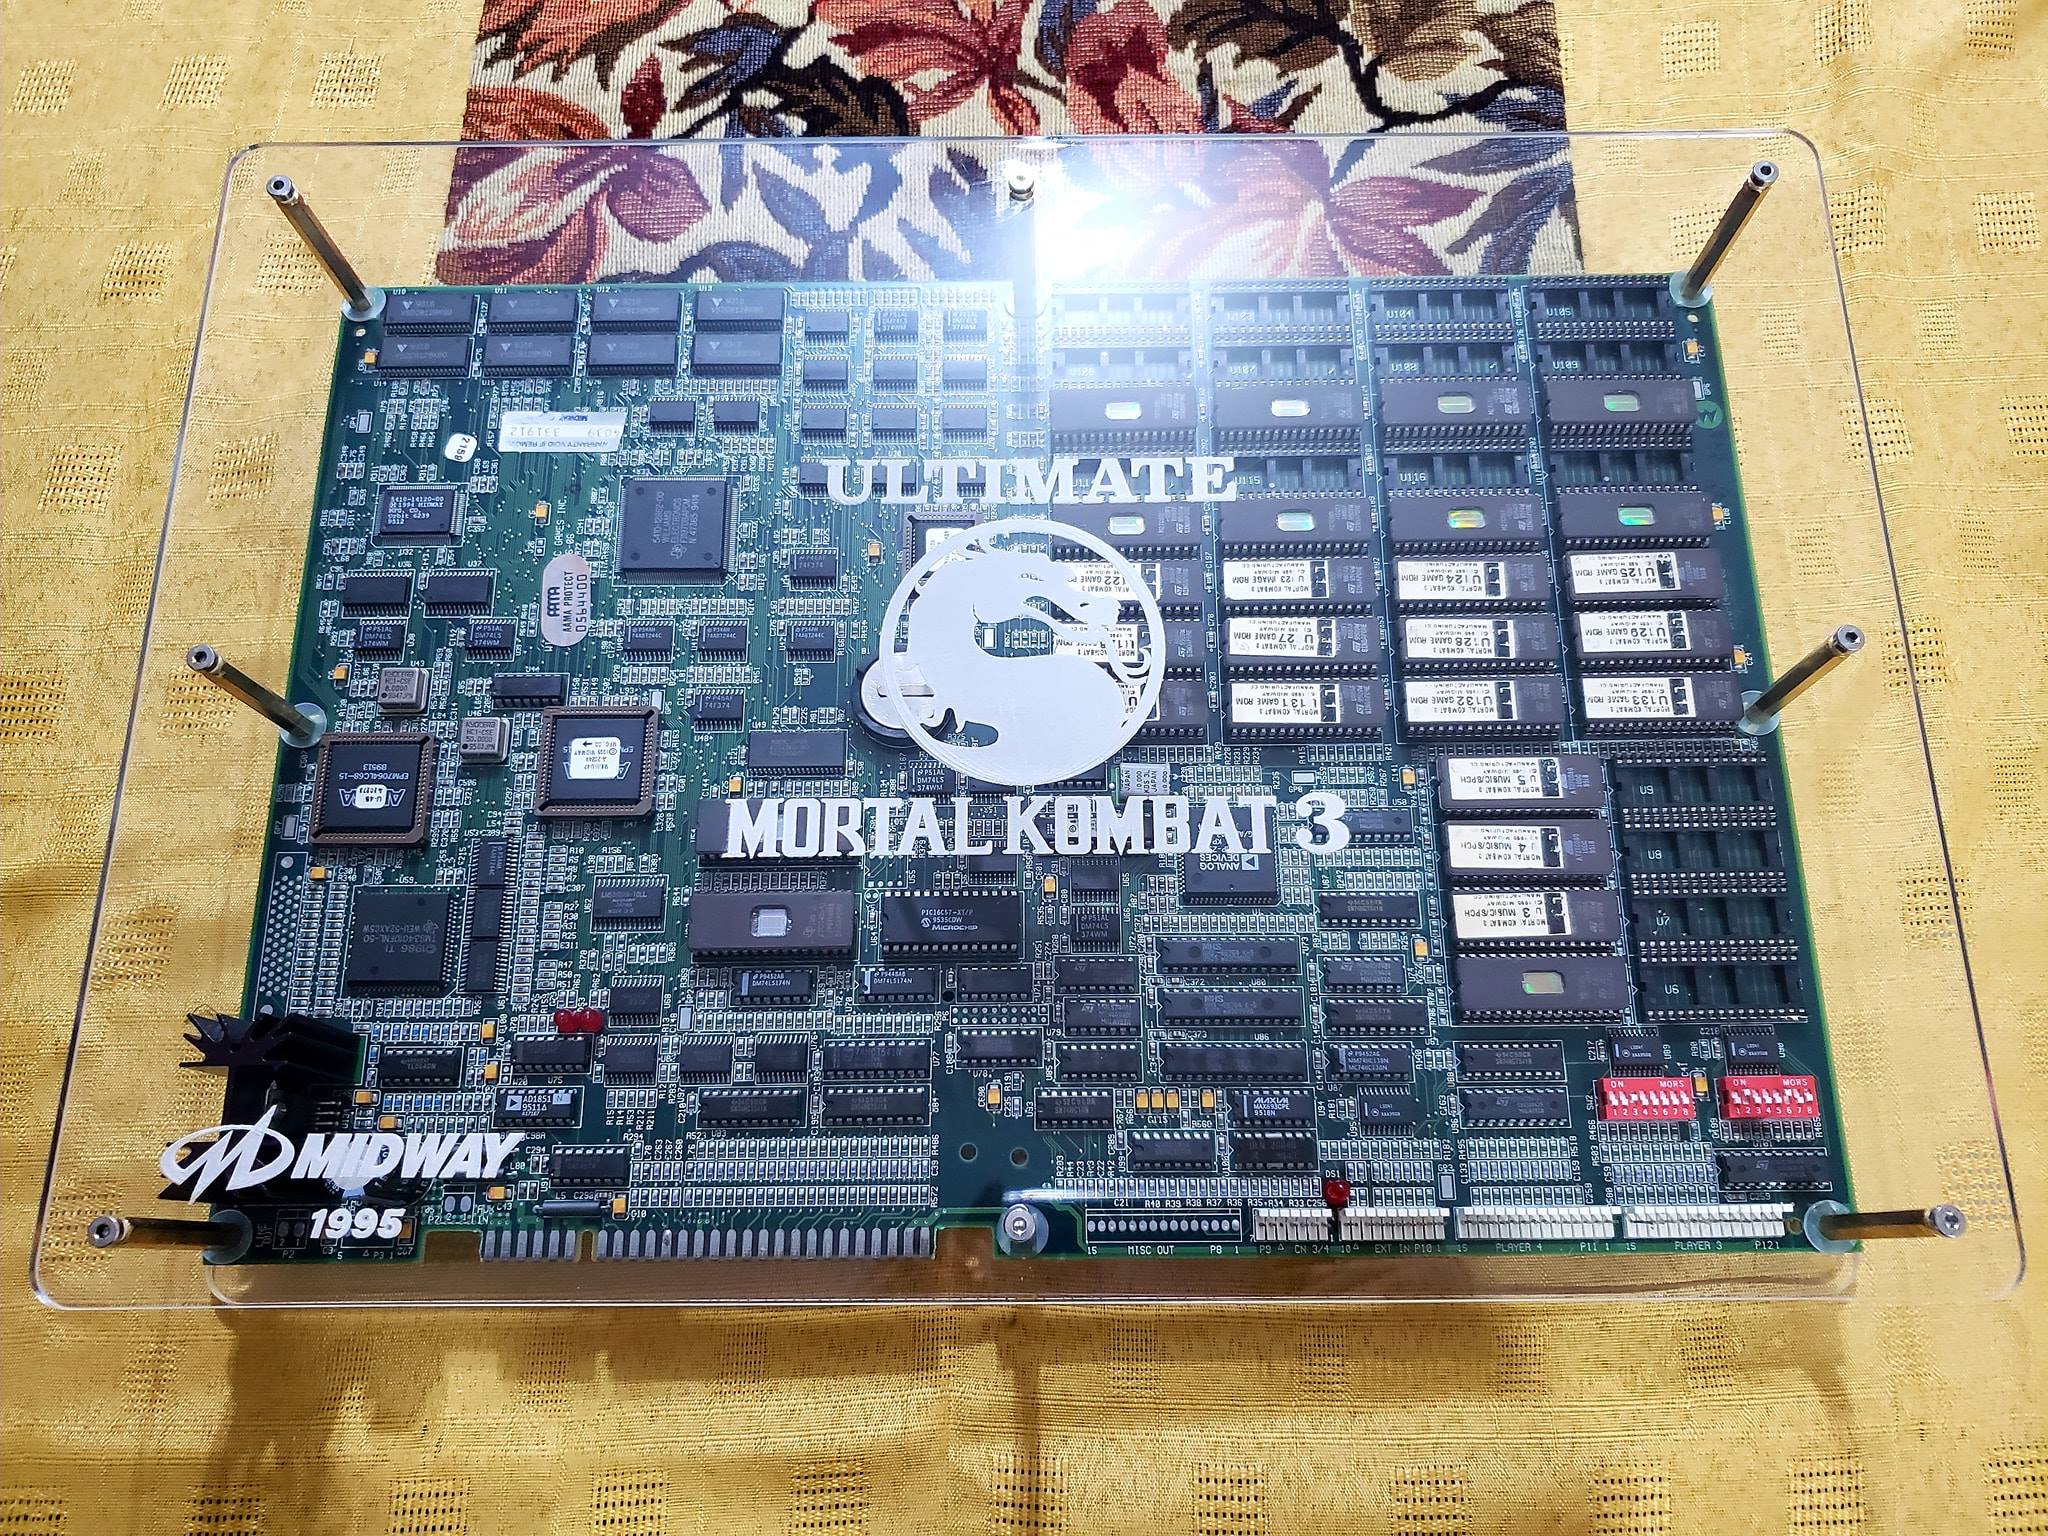 Ultimate Mortal Kombat 3 arcade PCB with case